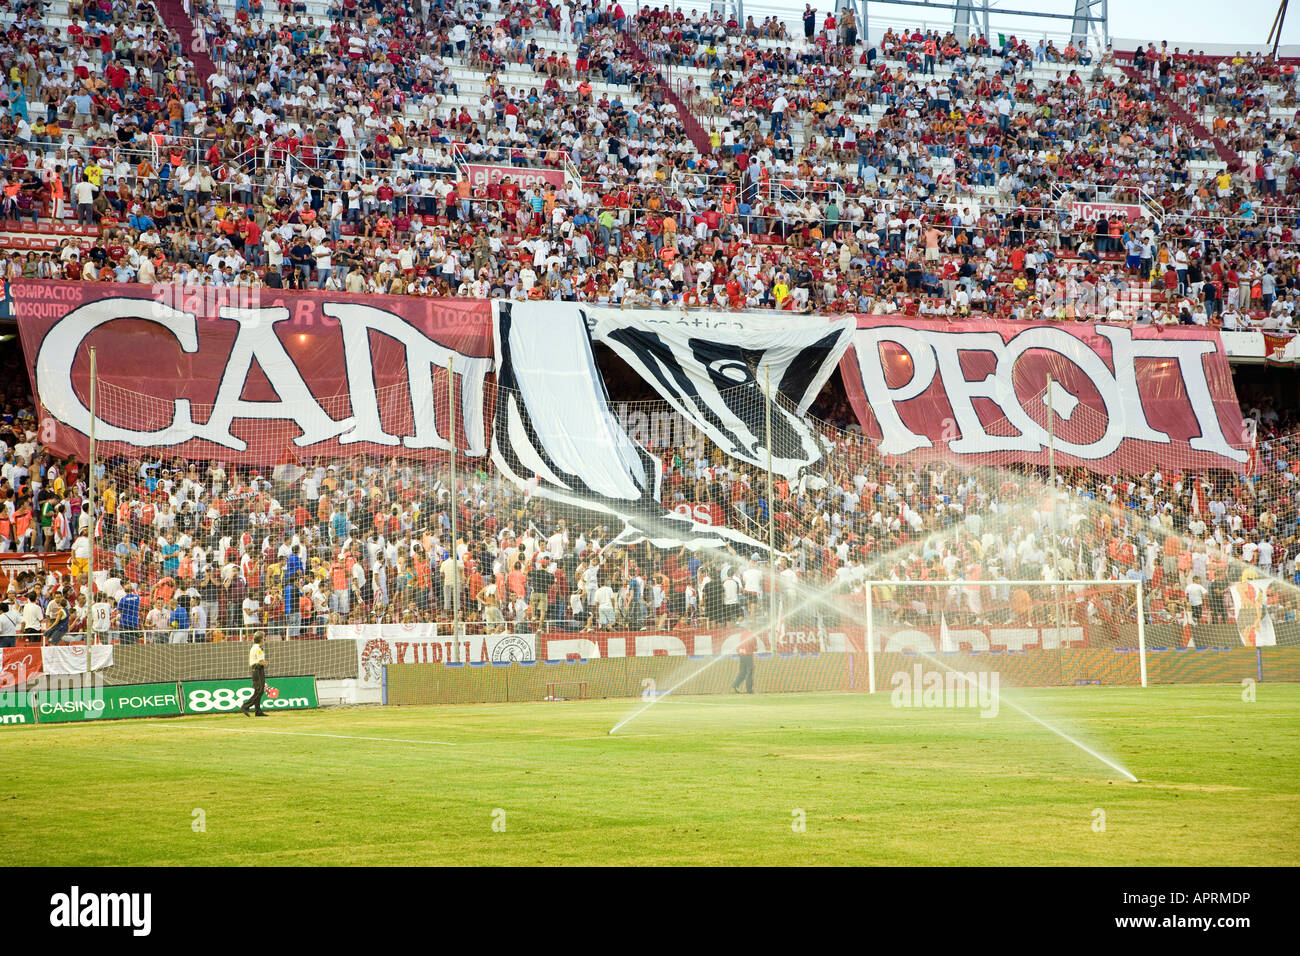 Tifo by Sevilla FC fans forming the word Campeon'' (Champion). Stock Photo